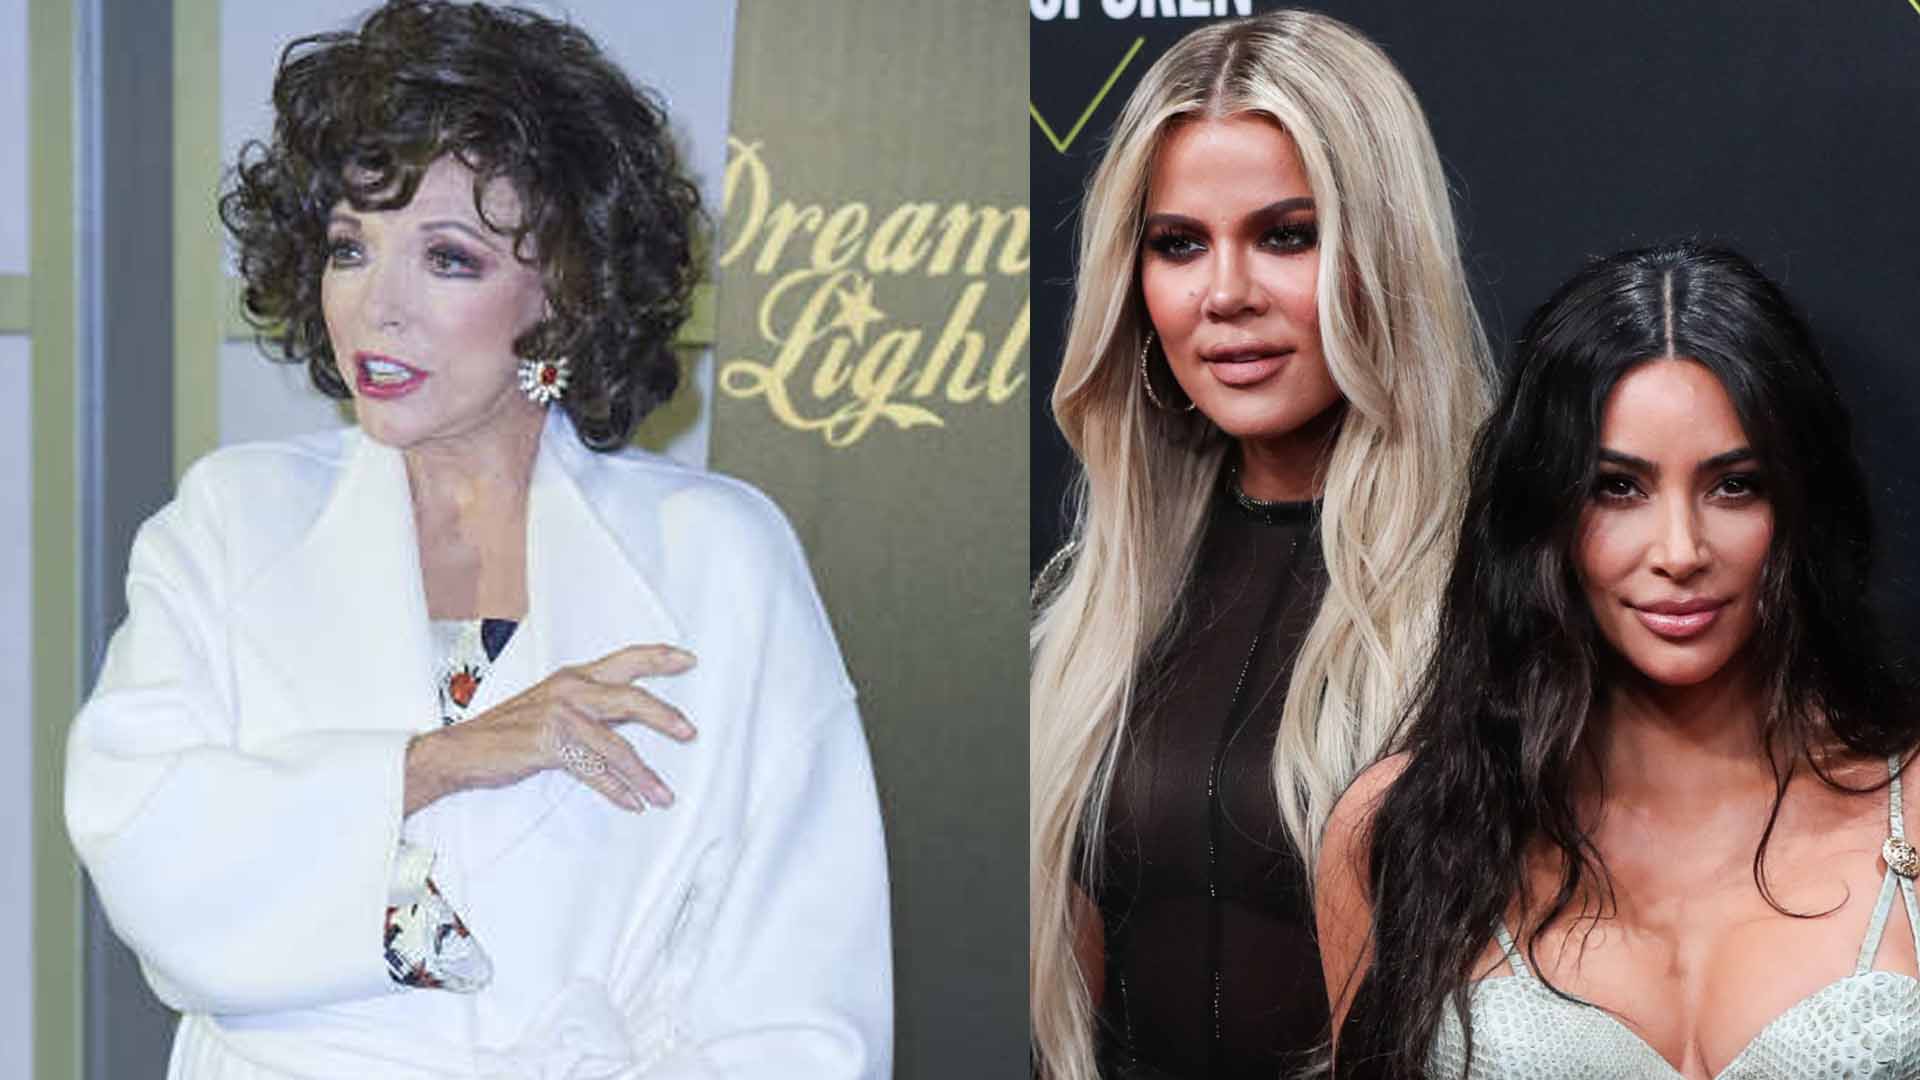 Joan Collins Slams The Kardashians In New Book: "There's An Awful Lot Of Surgery There"